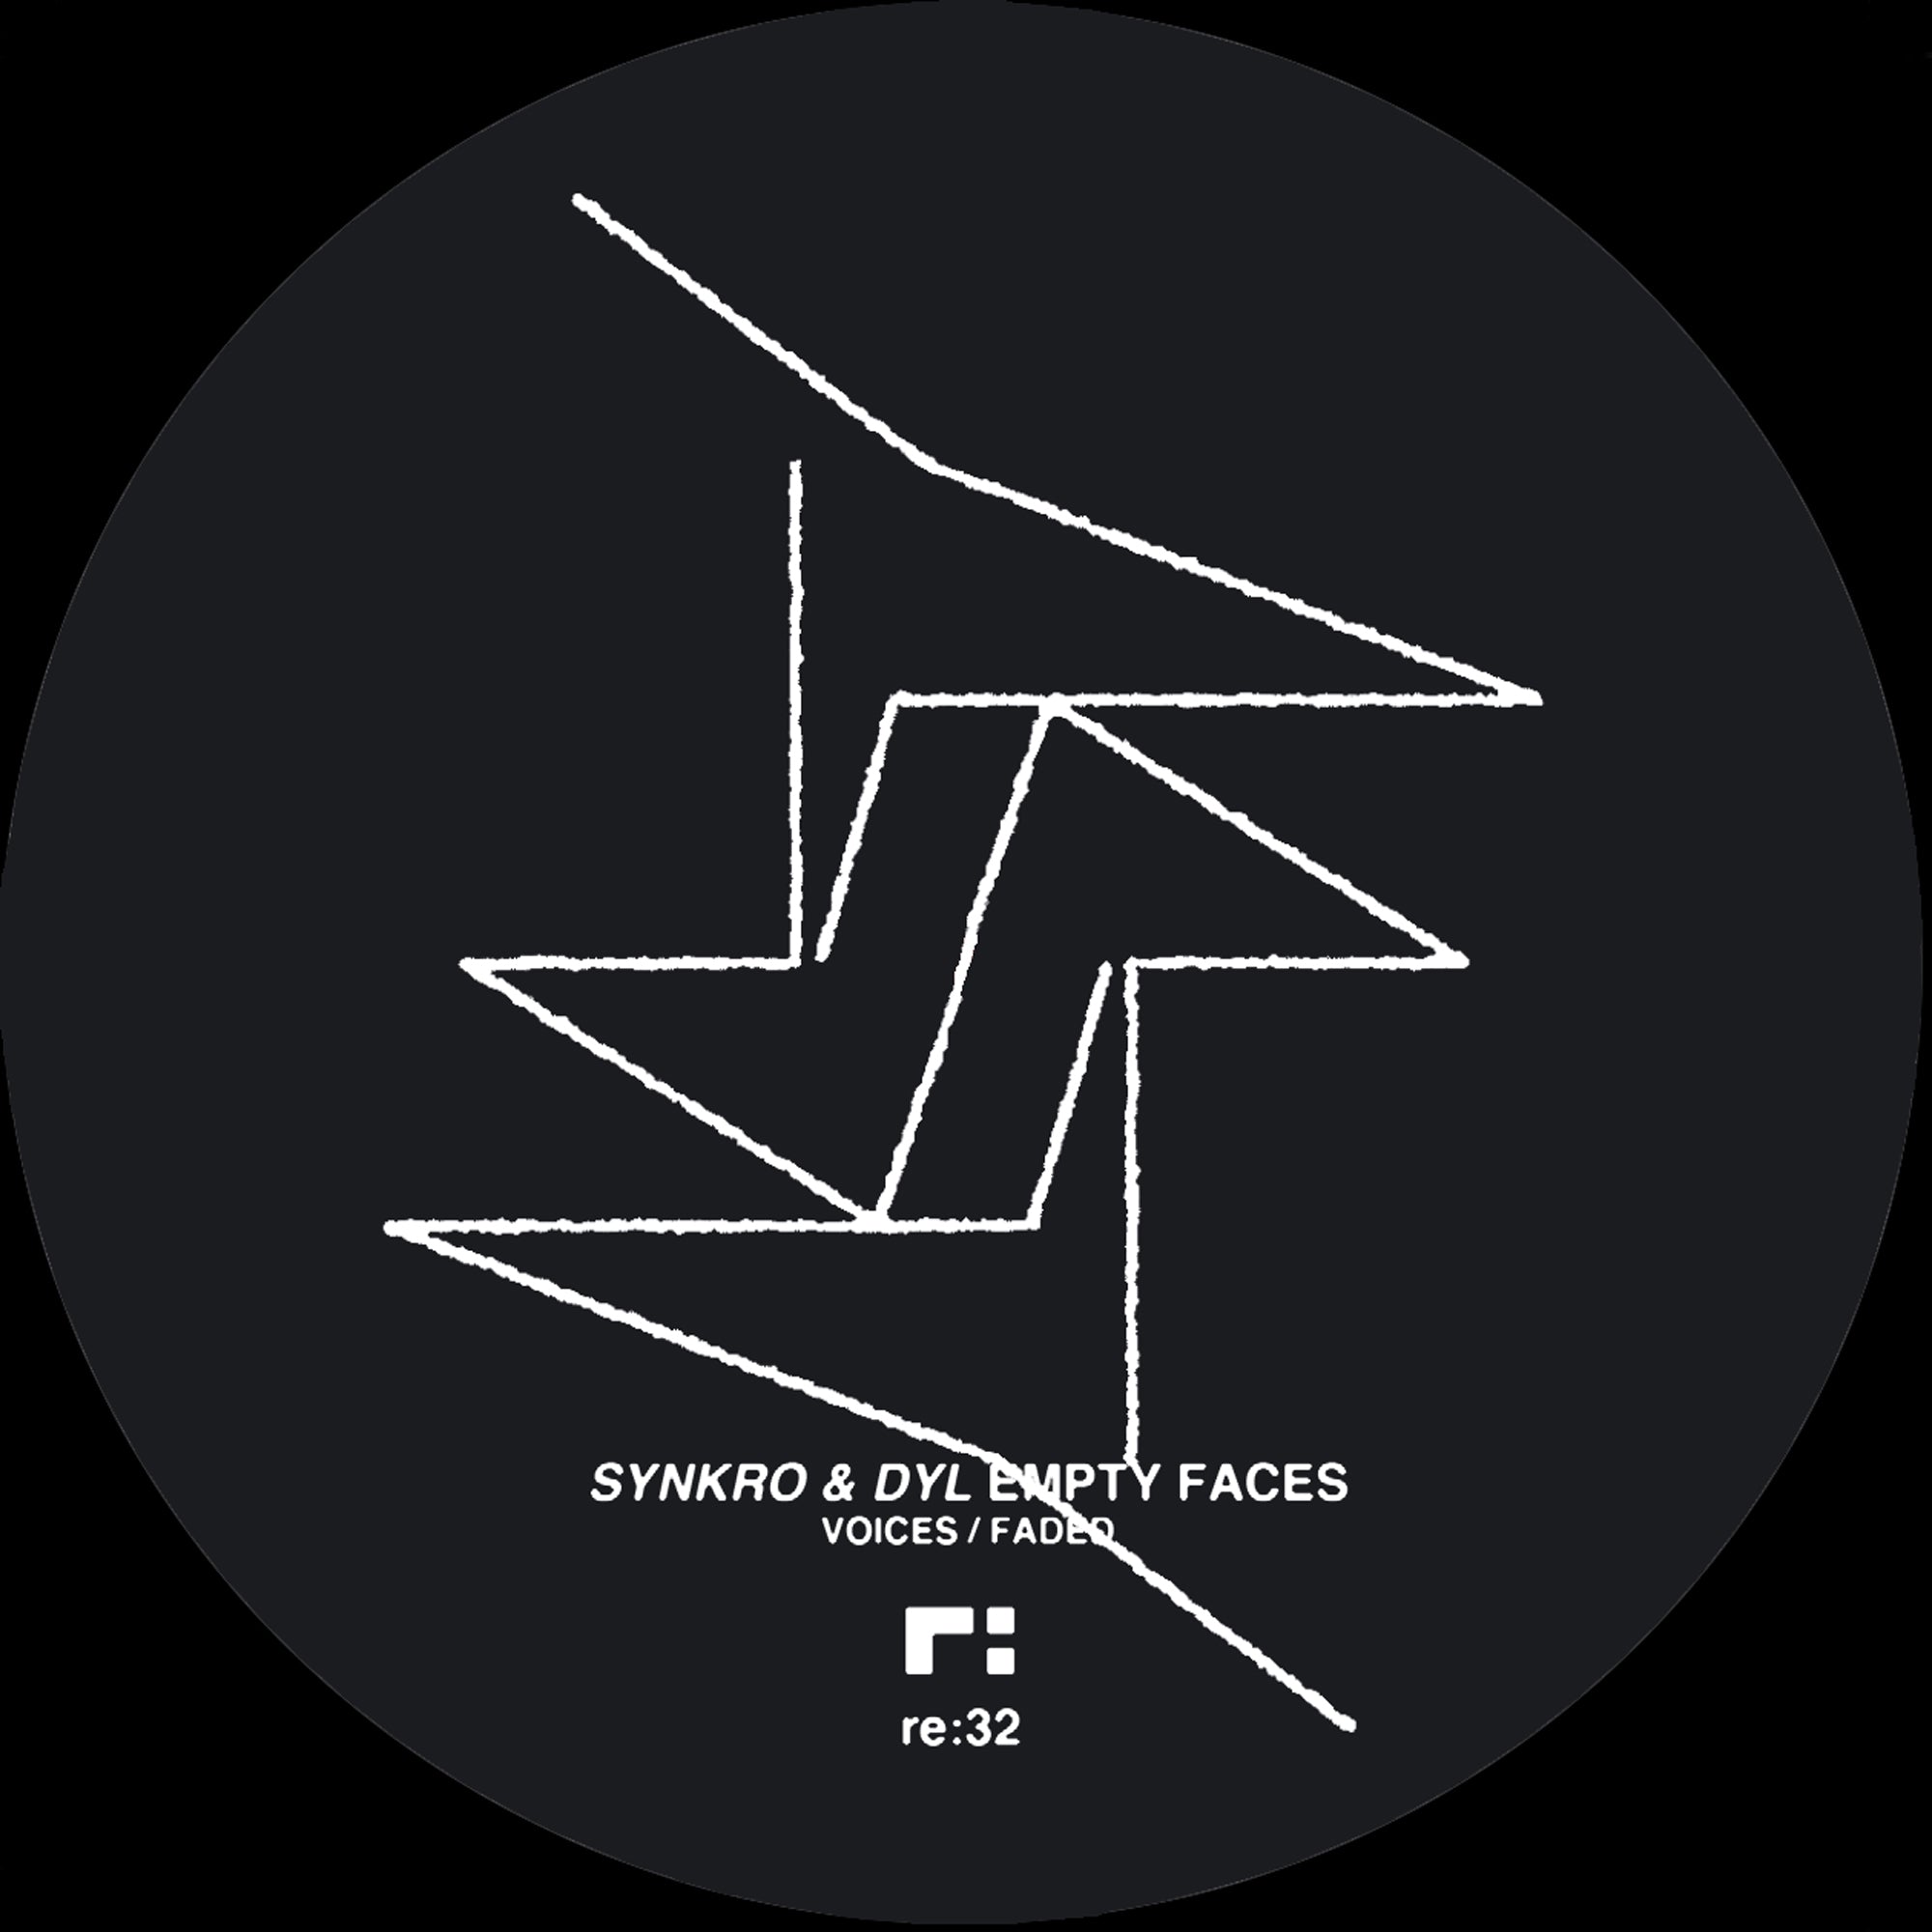 SYNKRO & DYL 'EMPTY FACES' 12"